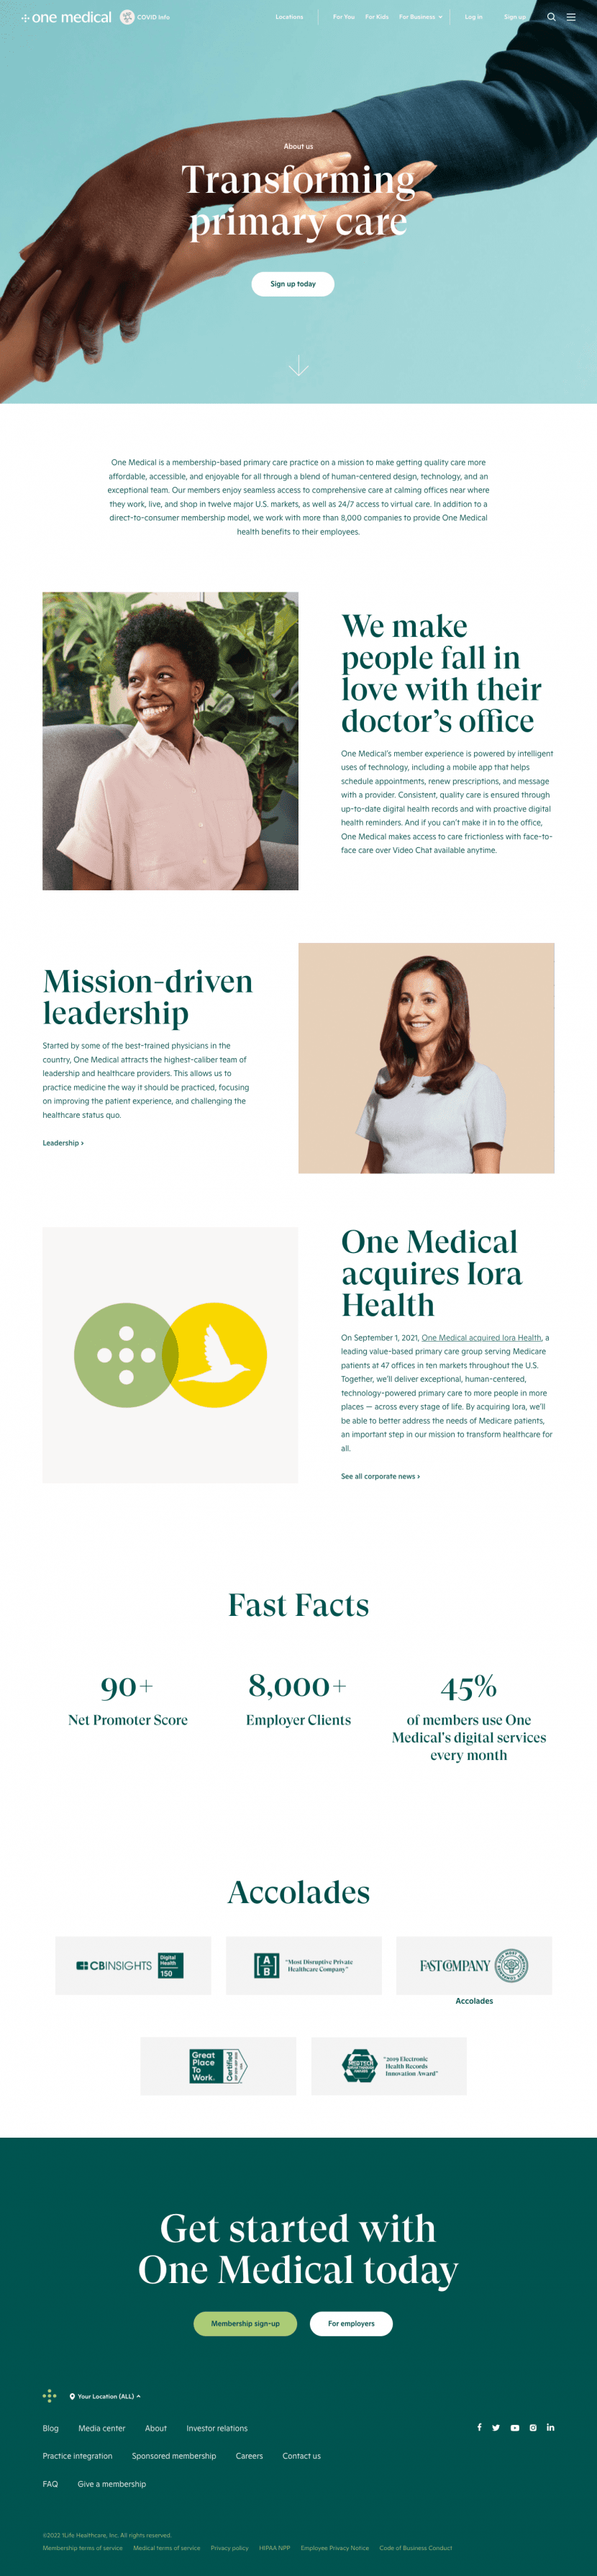 onemedical-about-us-page